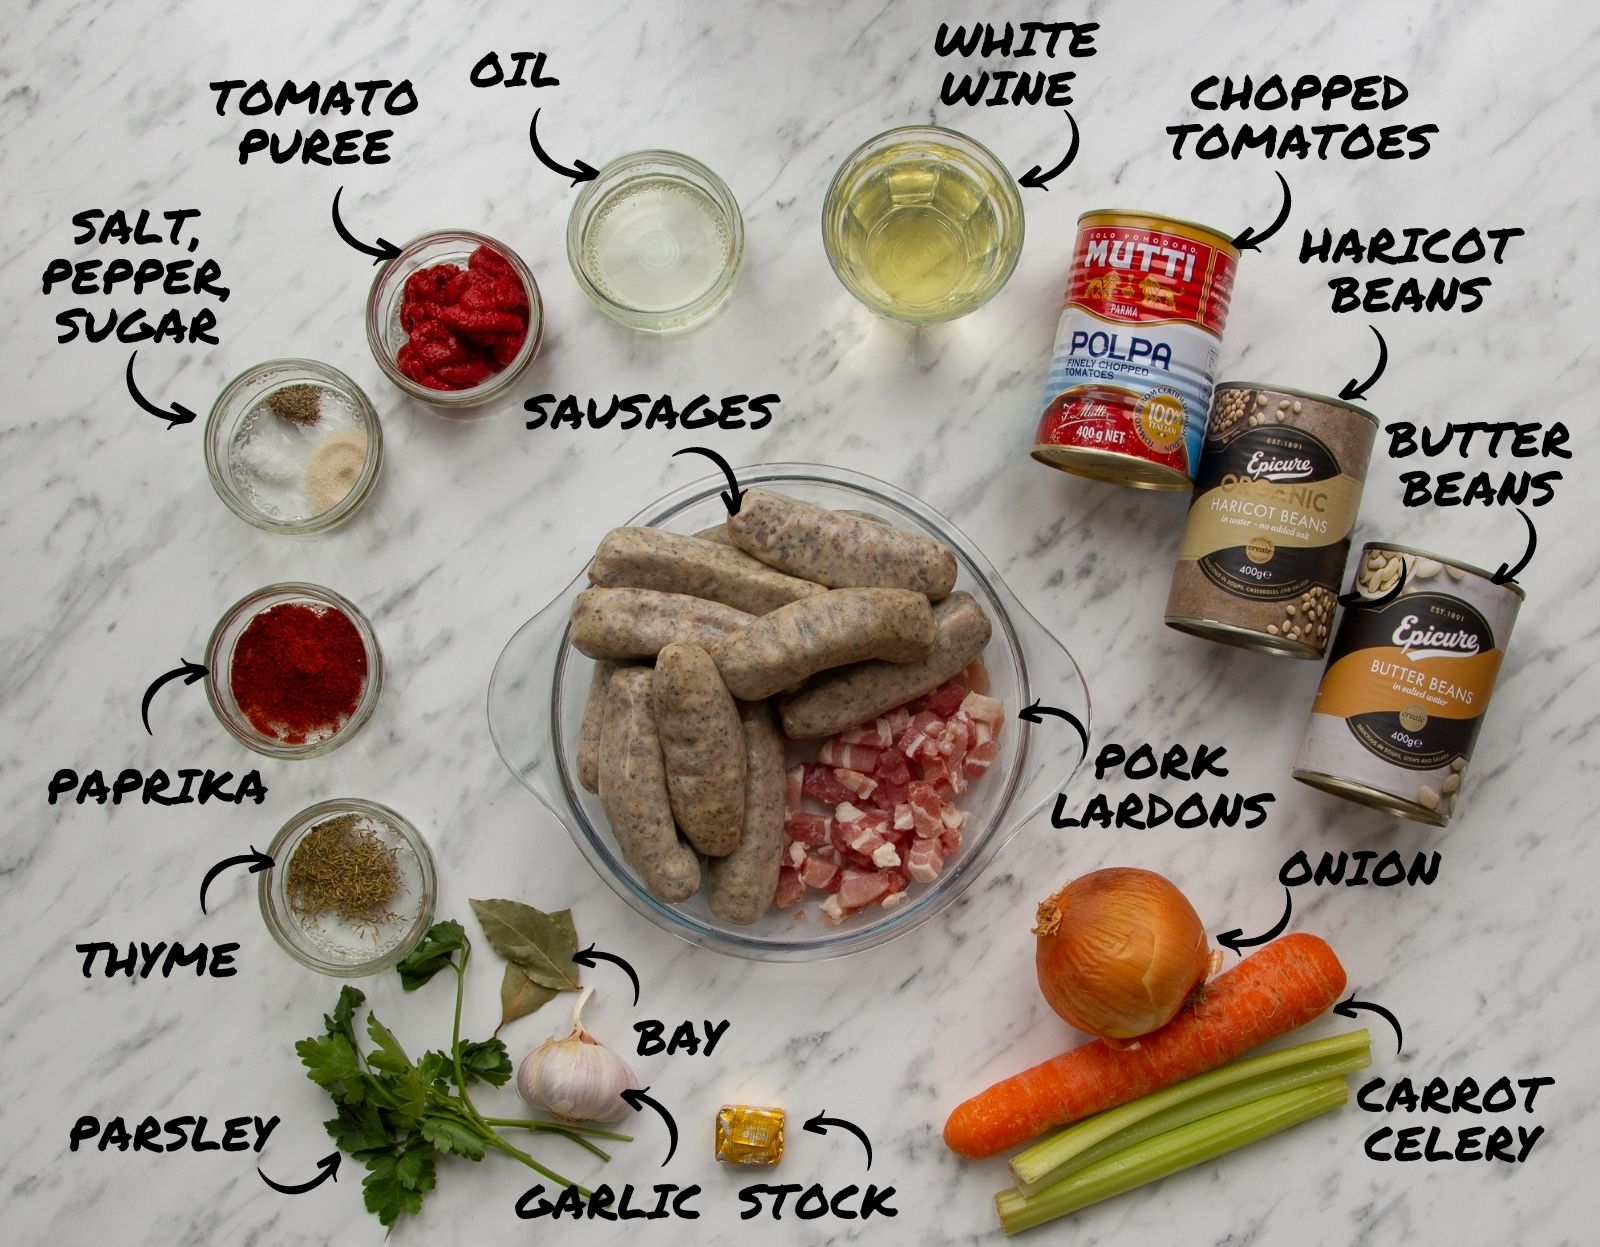 Image to show the six steps needed to make the slow cooker sausage casserole. Cut the vegetables into cubes, brown the meat, reduce the wine and then add all the ingredients to the slow cooker.